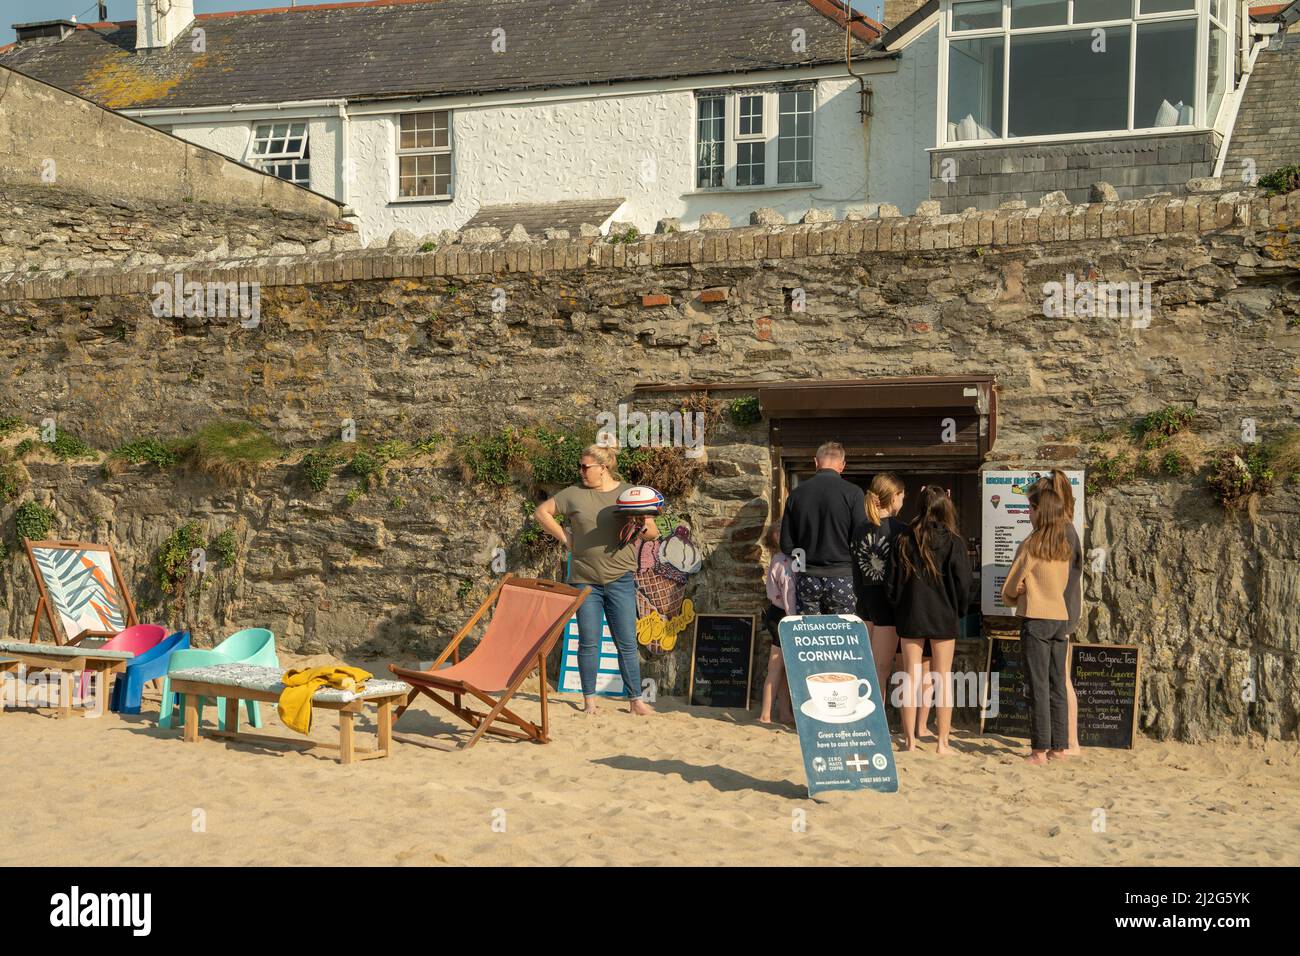 UK holidays. A group of people queue at a café on the sands at Porth Beach, Cornwall, UK. Credit: Hazel Plater/Alamy Stock Photo